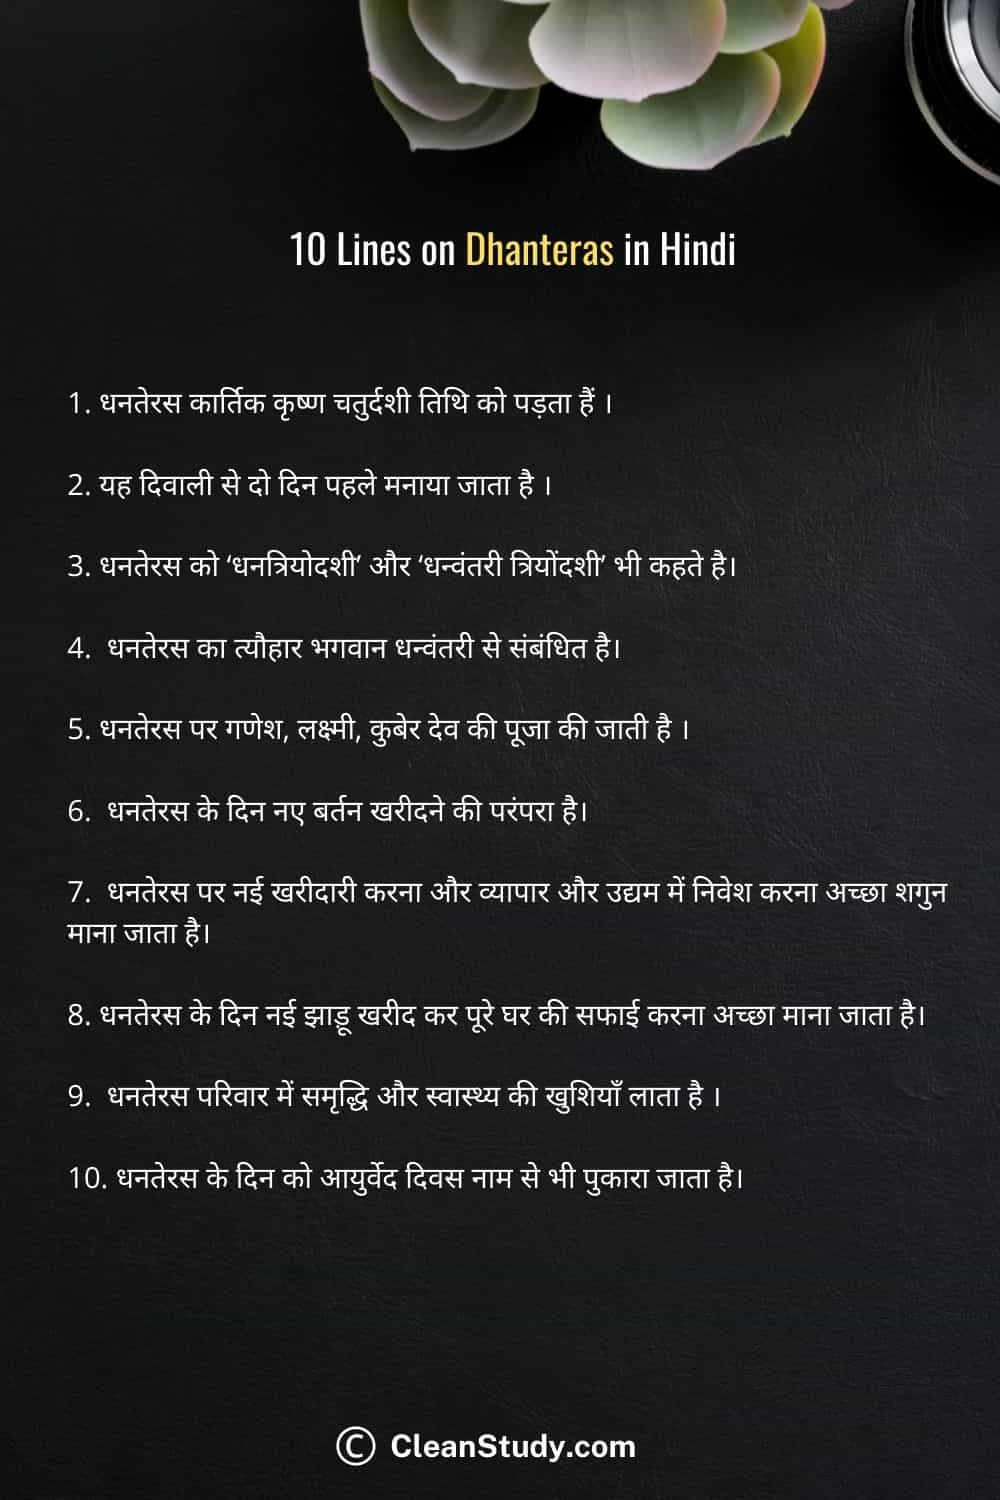 10 Lines On Dhanteras In Hindi